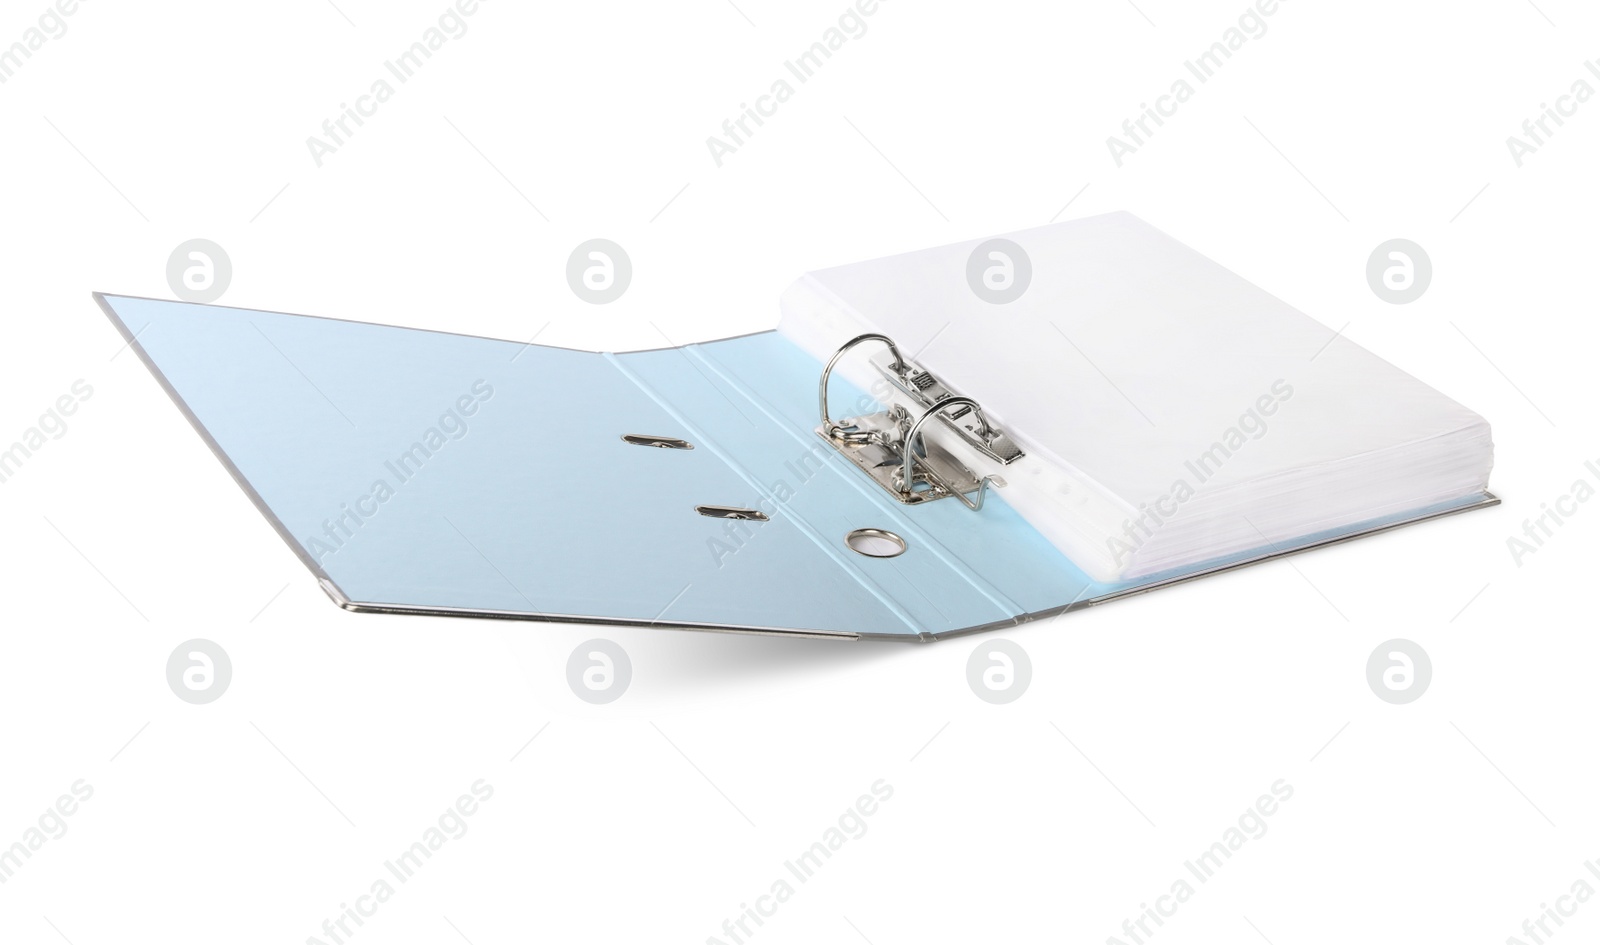 Photo of One open office folder isolated on white